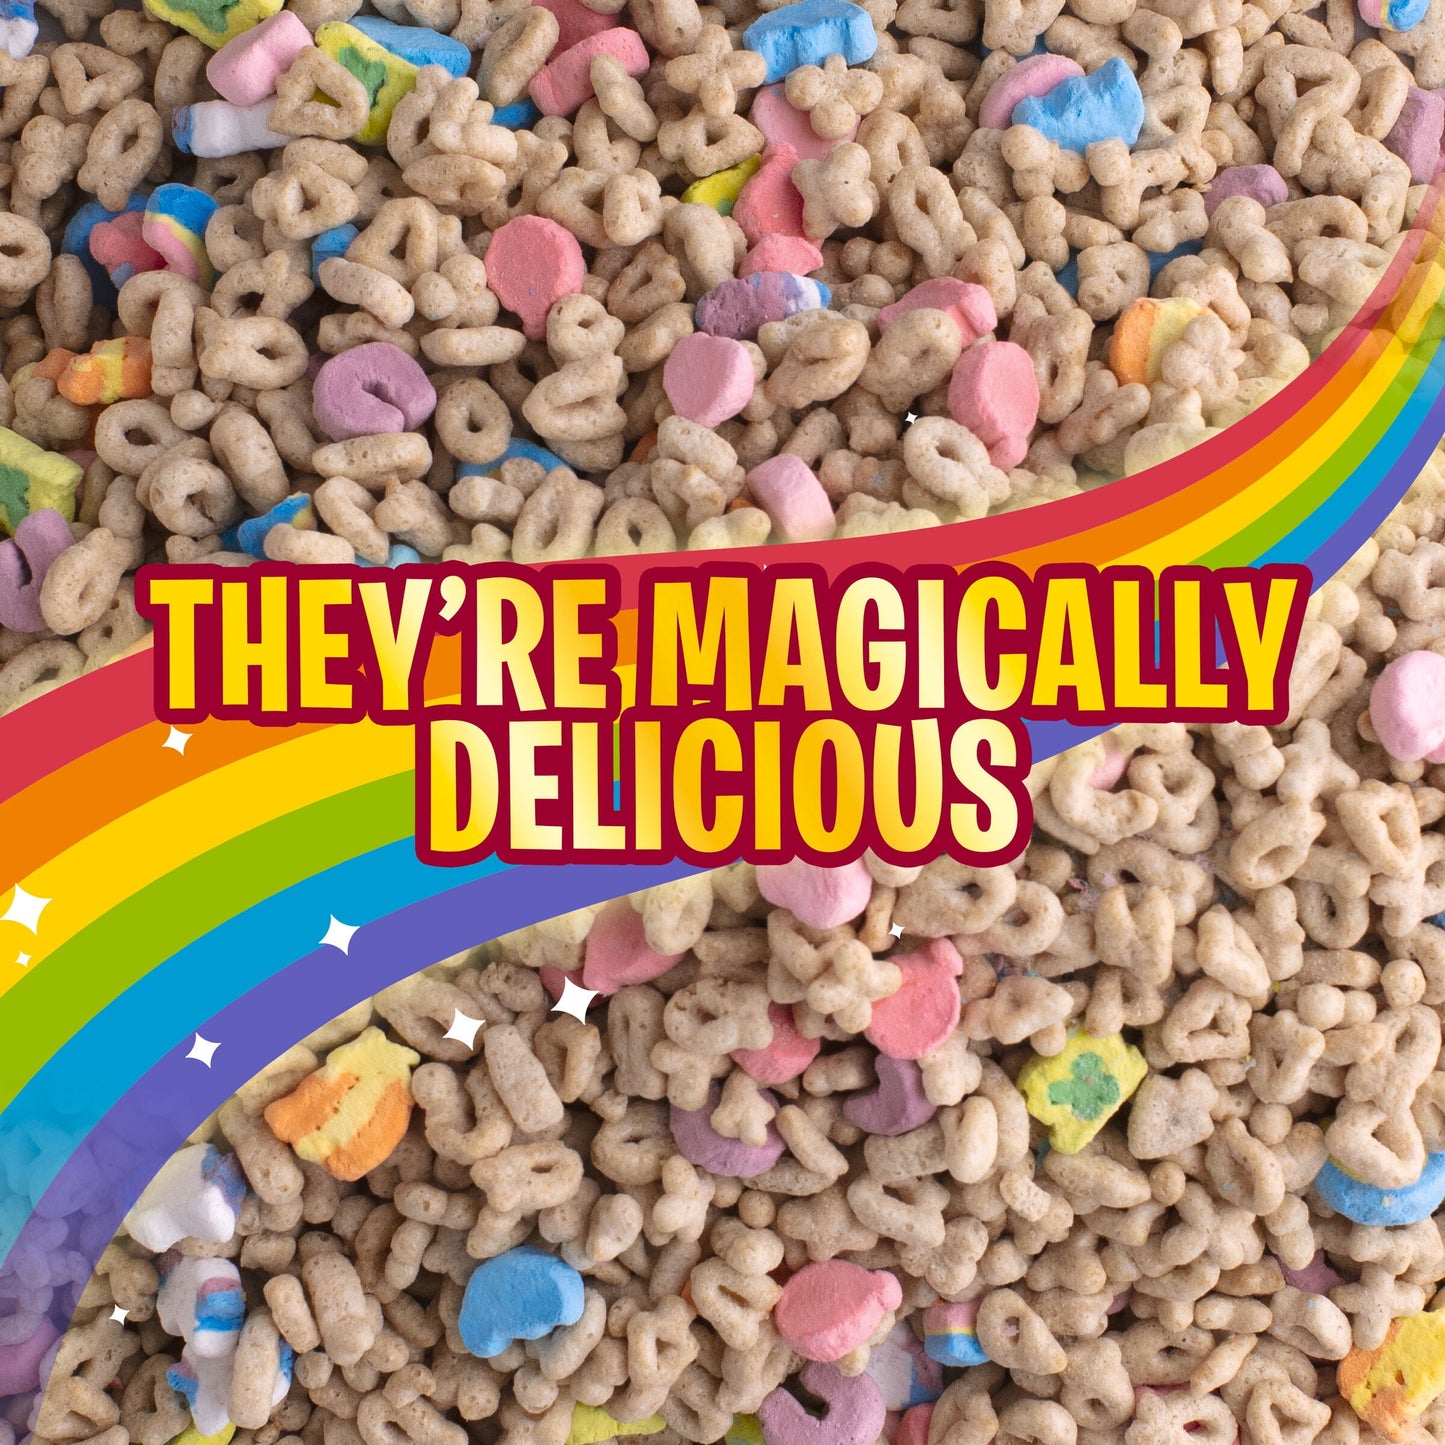 Lucky Charms Gluten Free Kids Breakfast Cereal with Marshmallows, Mega Size, 29.1 oz